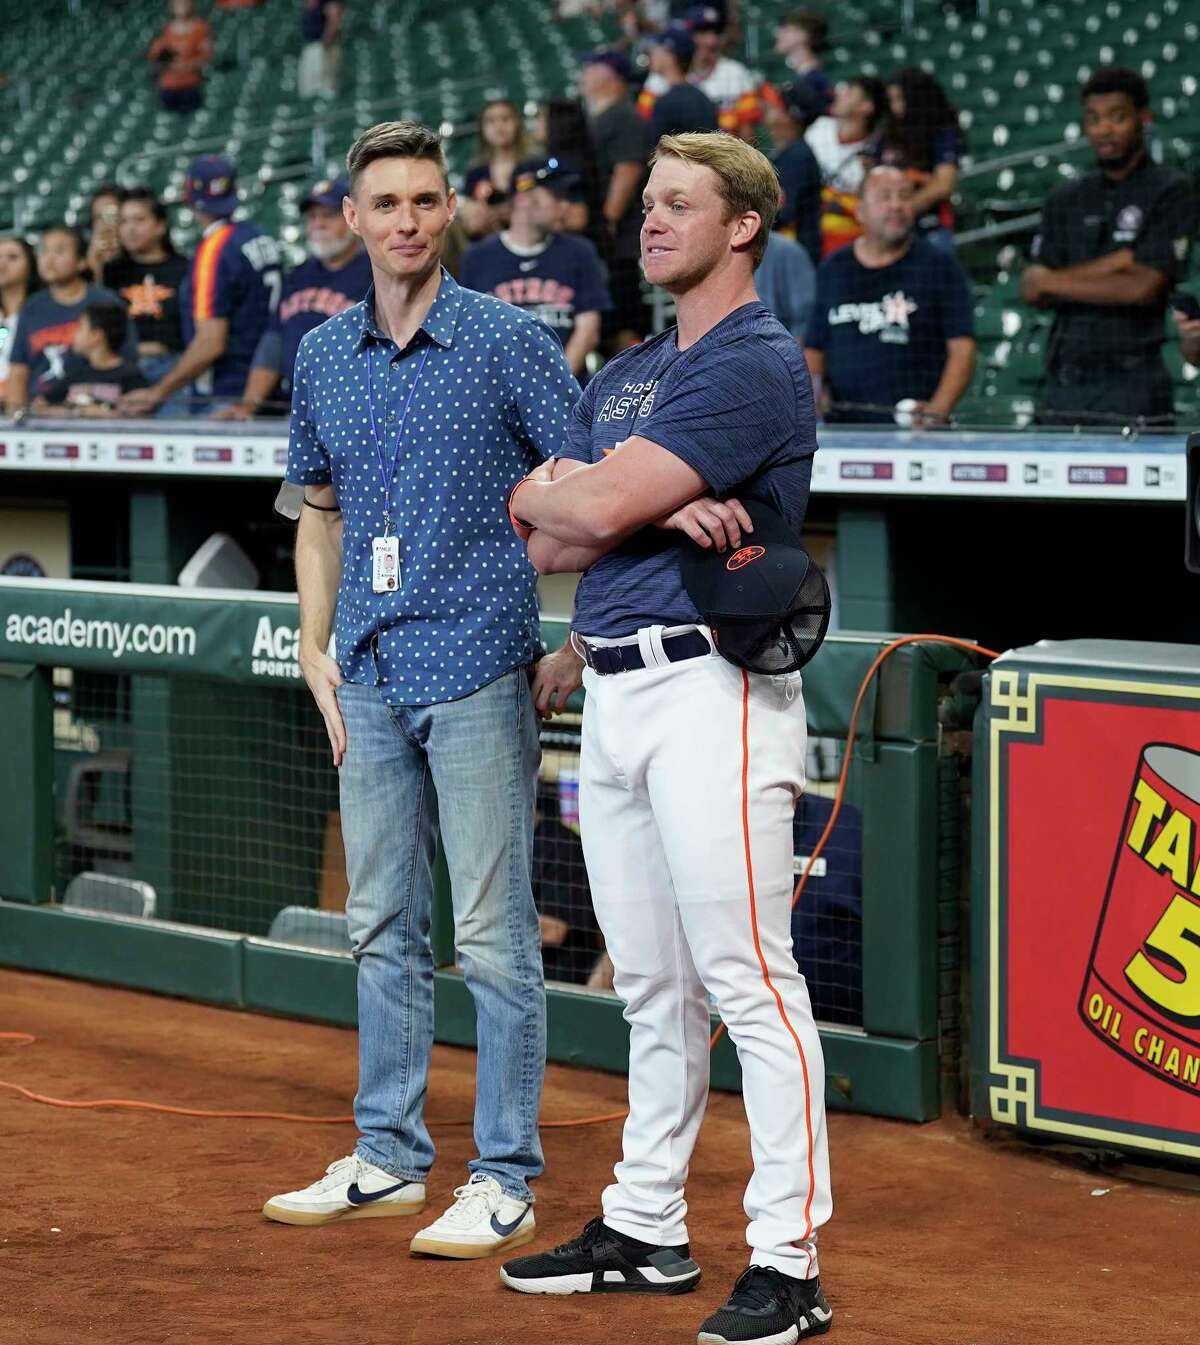 Andrew Ball, left, and Kyle Giusti, an assistant at HBU, and was part of the batting practice tryouts during BP before the start of an MLB game at Minute Maid Park on Saturday, June 11, 2022 in Houston.